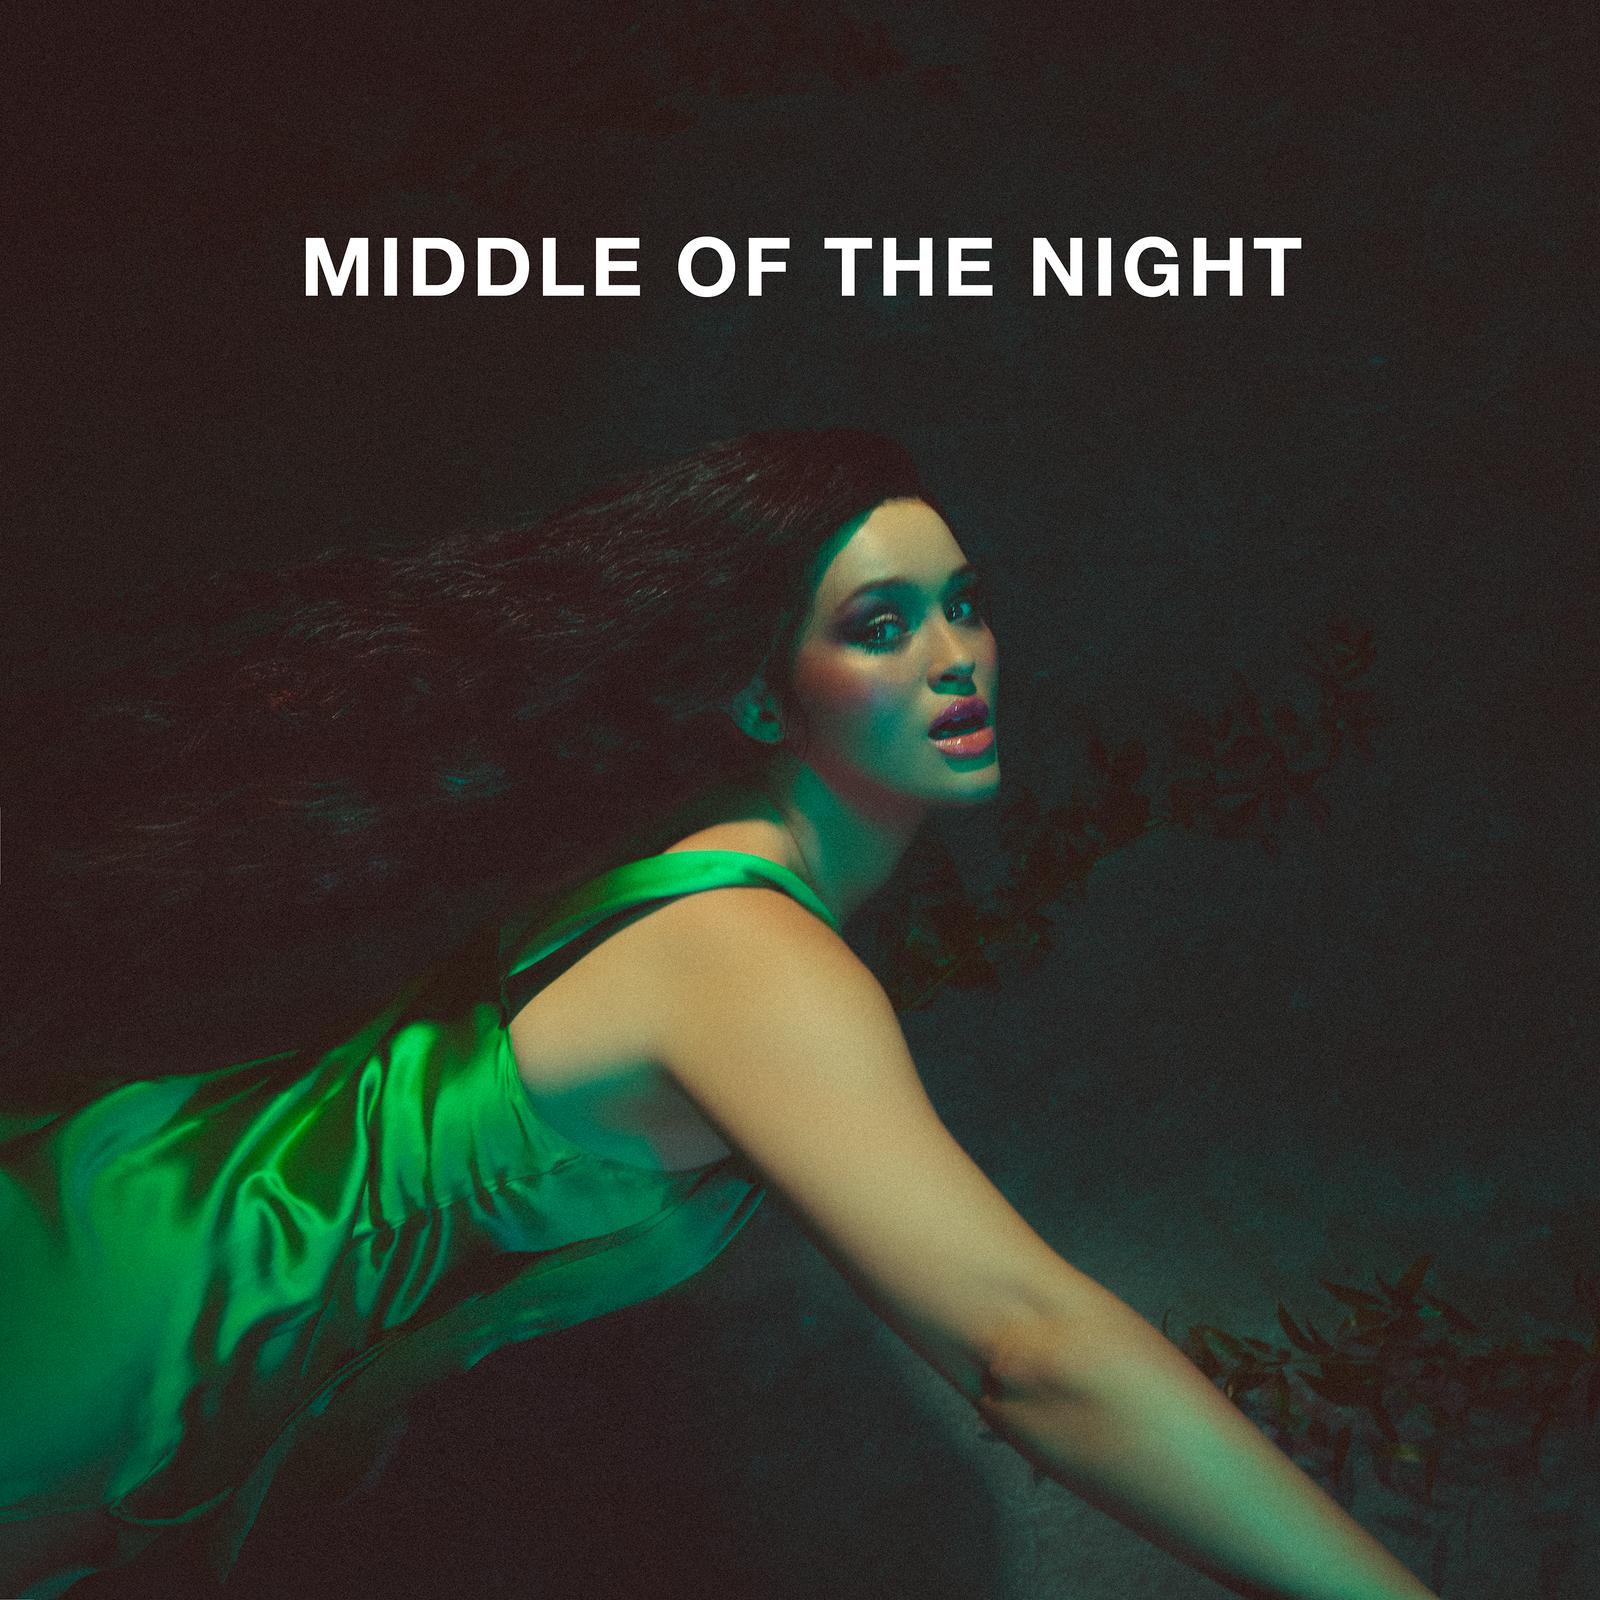 Elley DuhÃ© - Middle of the night